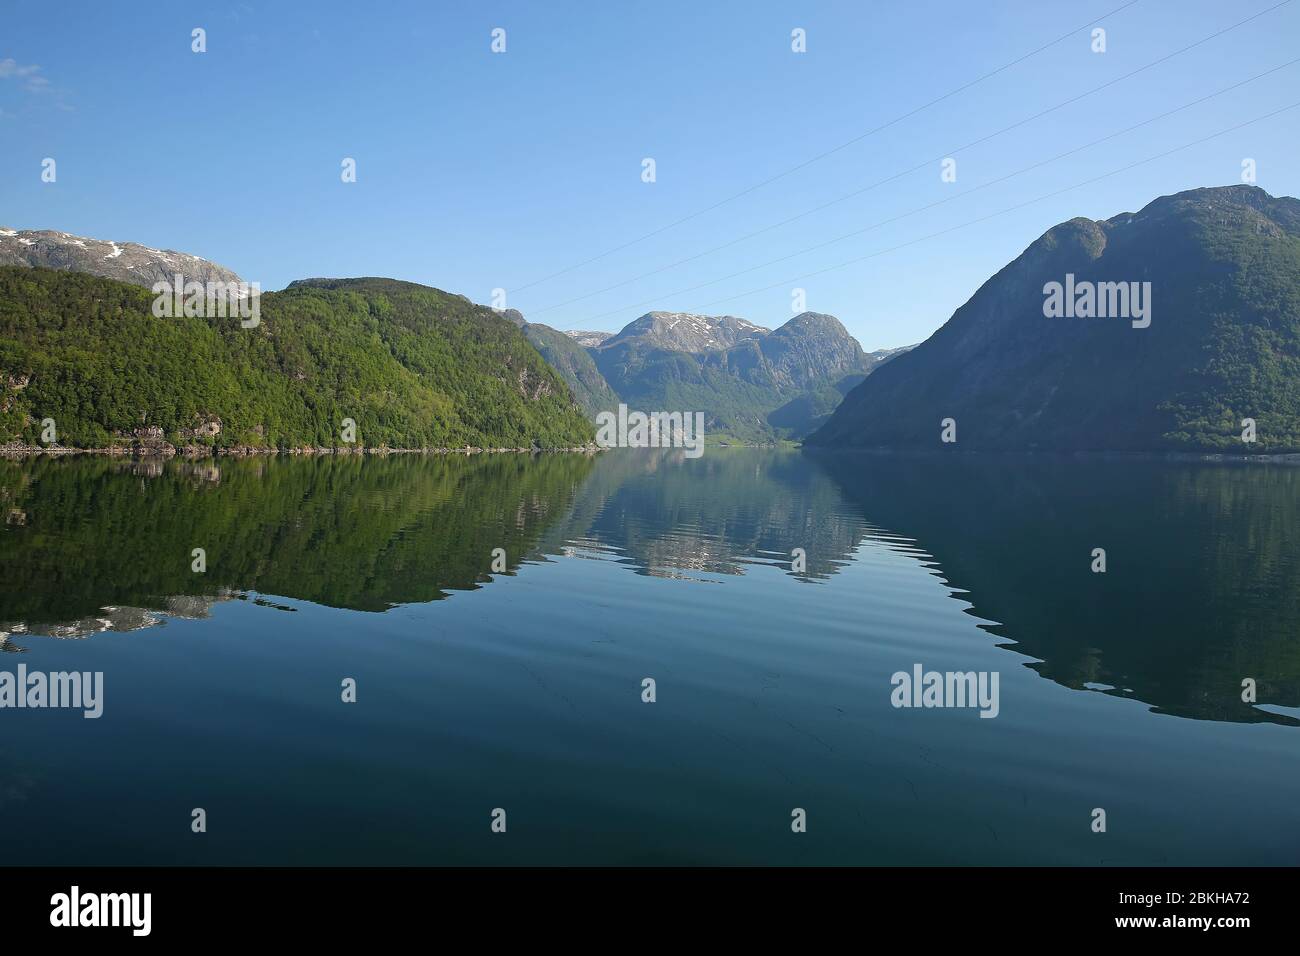 Beautiful landscape in the fjord, with reflections of the mountains in the water. Peace & tranquility, Rosendal, Hardangerfjord, Norway. Stock Photo